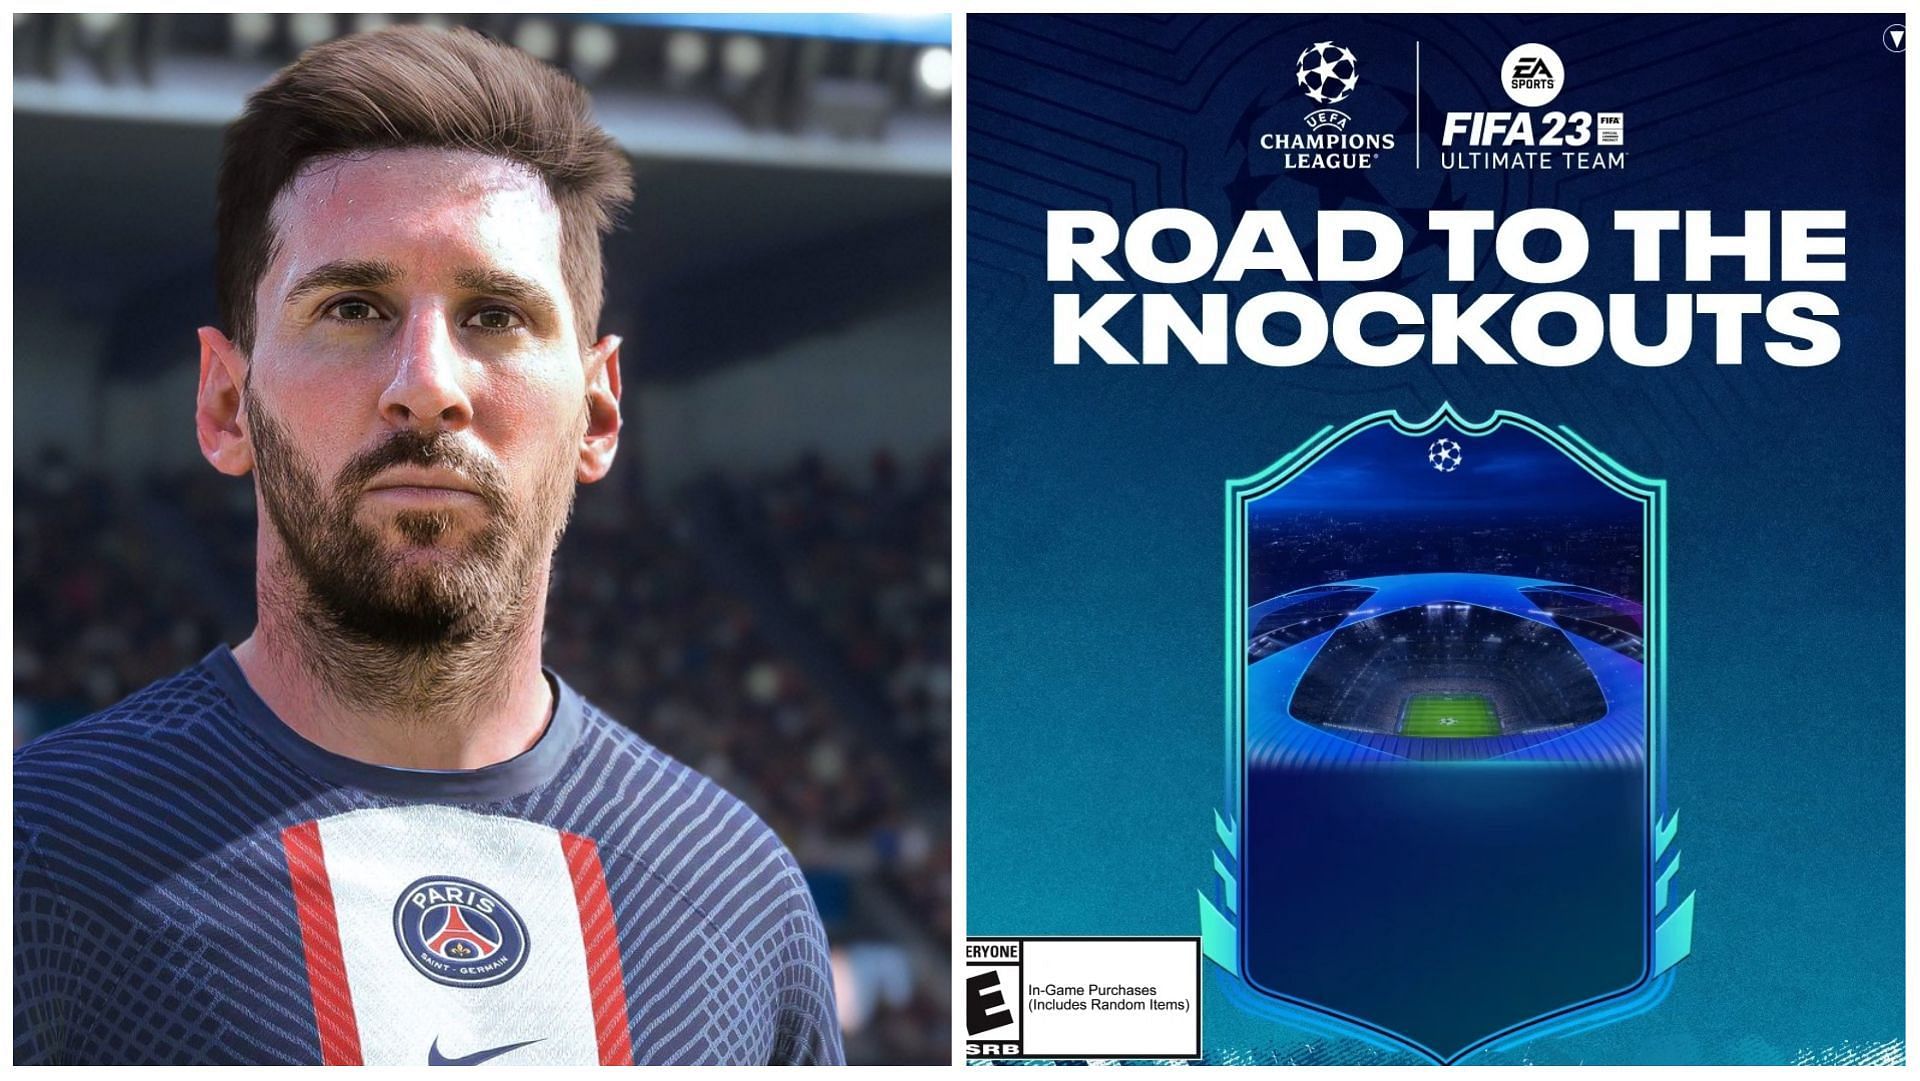 RTTK Lionel Messi is amongst the best cards in FIFA 23 (Images via EA Sports)